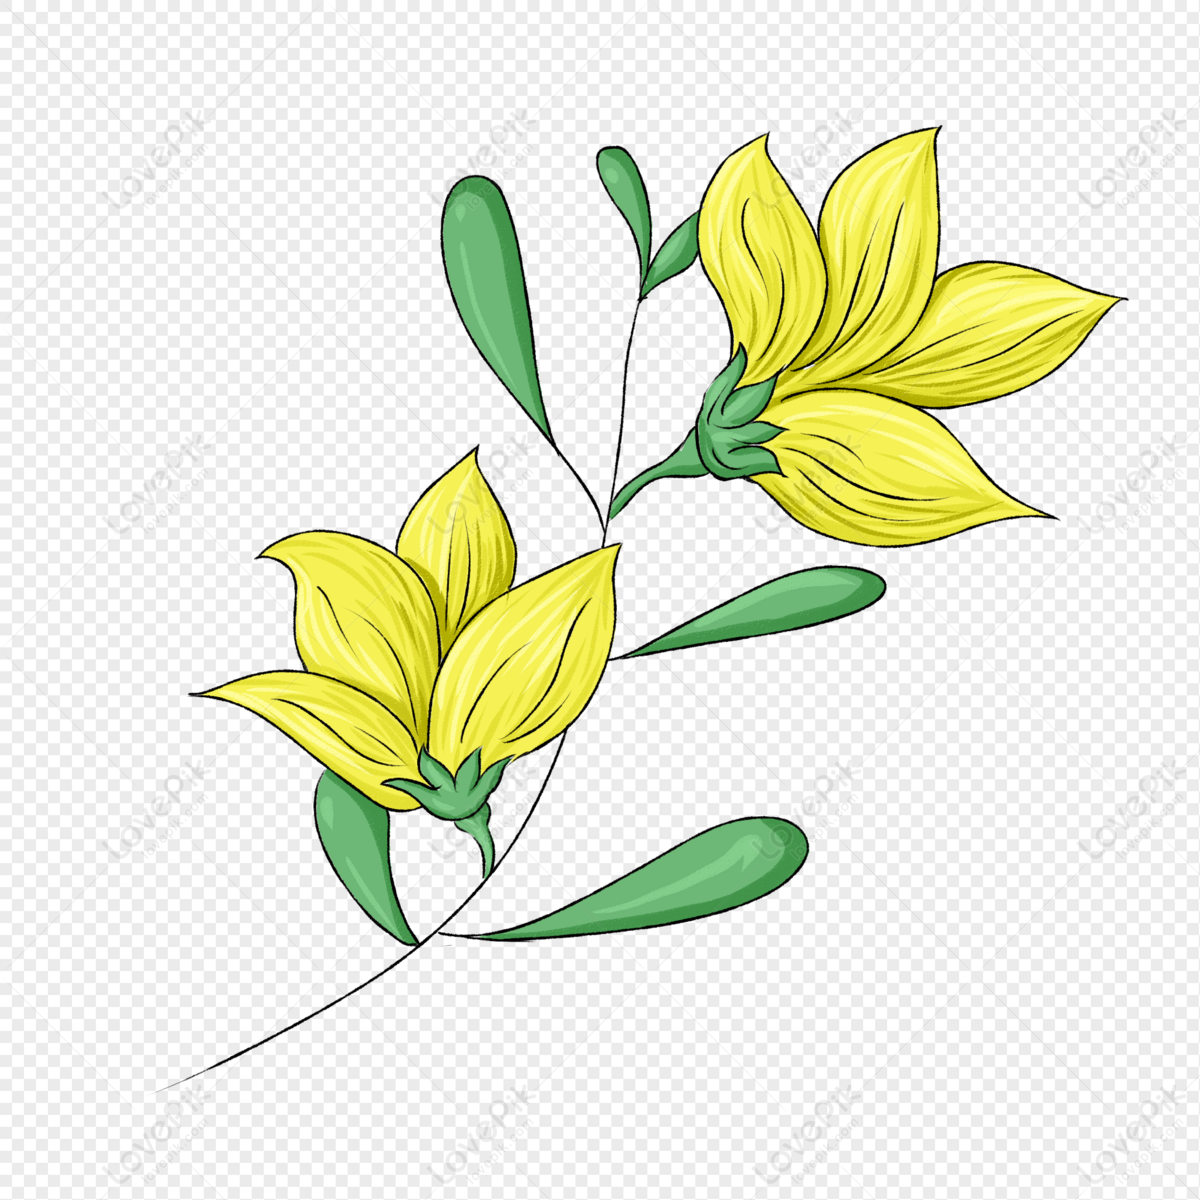 How to Draw a Jasmine Flower - Really Easy Drawing Tutorial